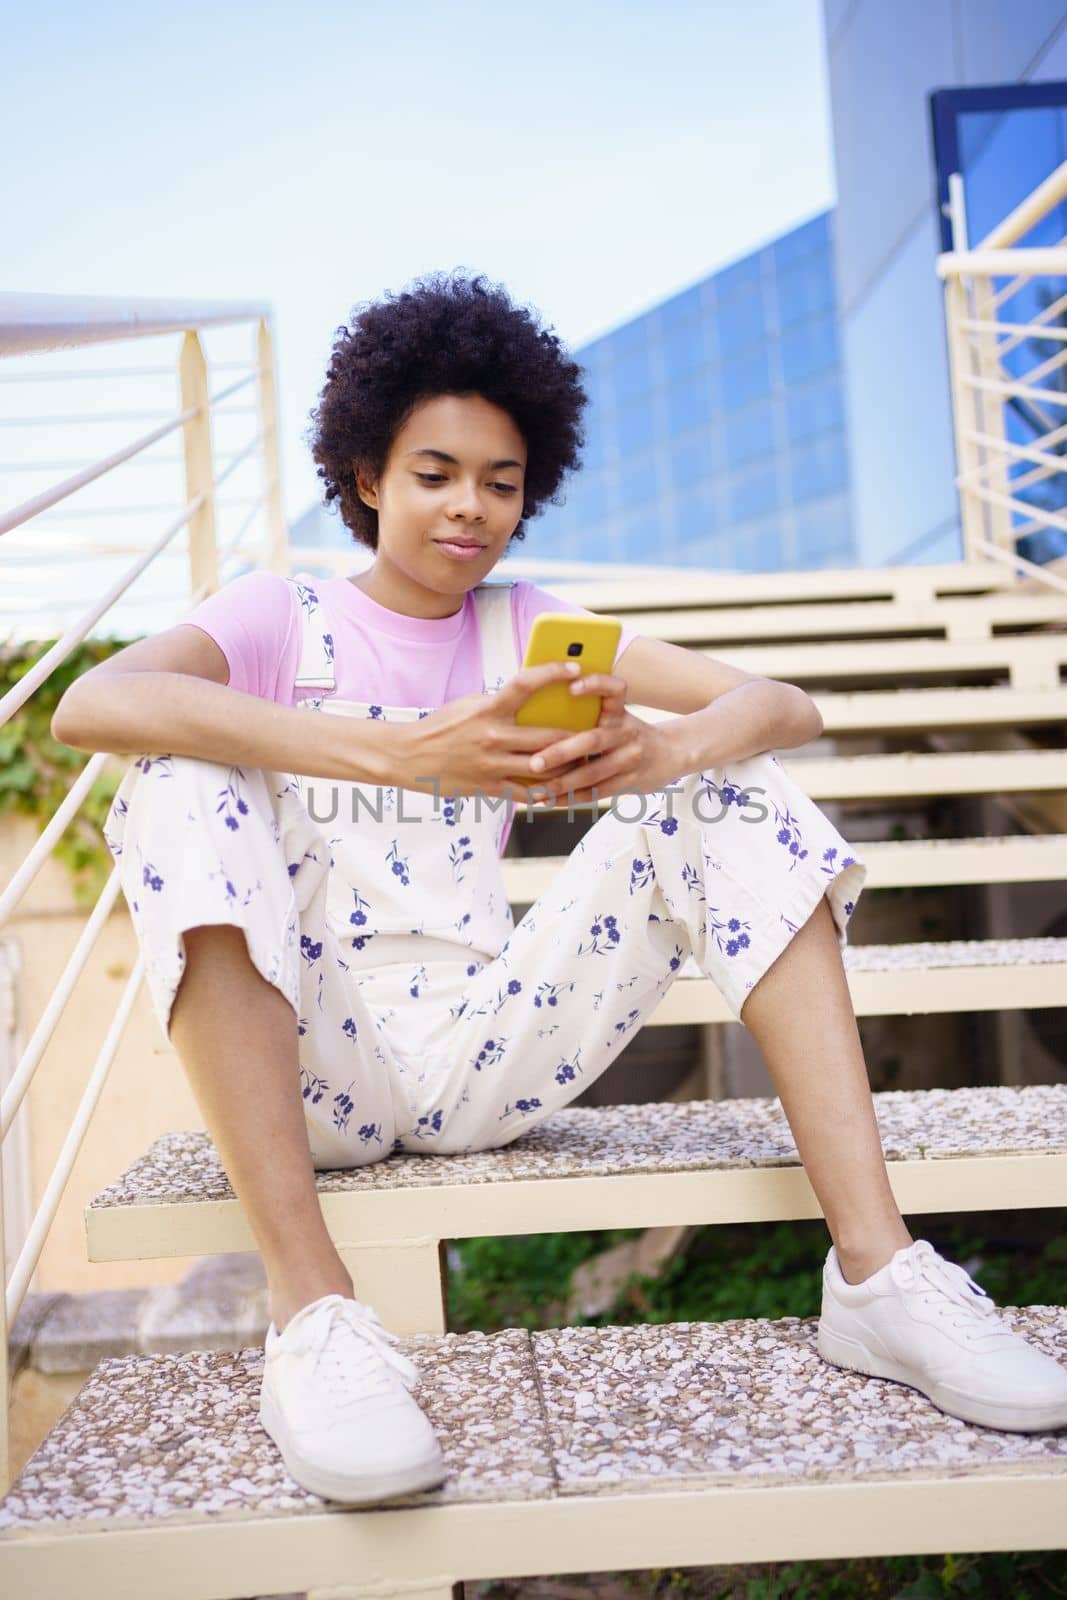 Black woman texting with her smartphone, sitting on steps of a modern building. Cheerful young female, afro hair, on urban background.